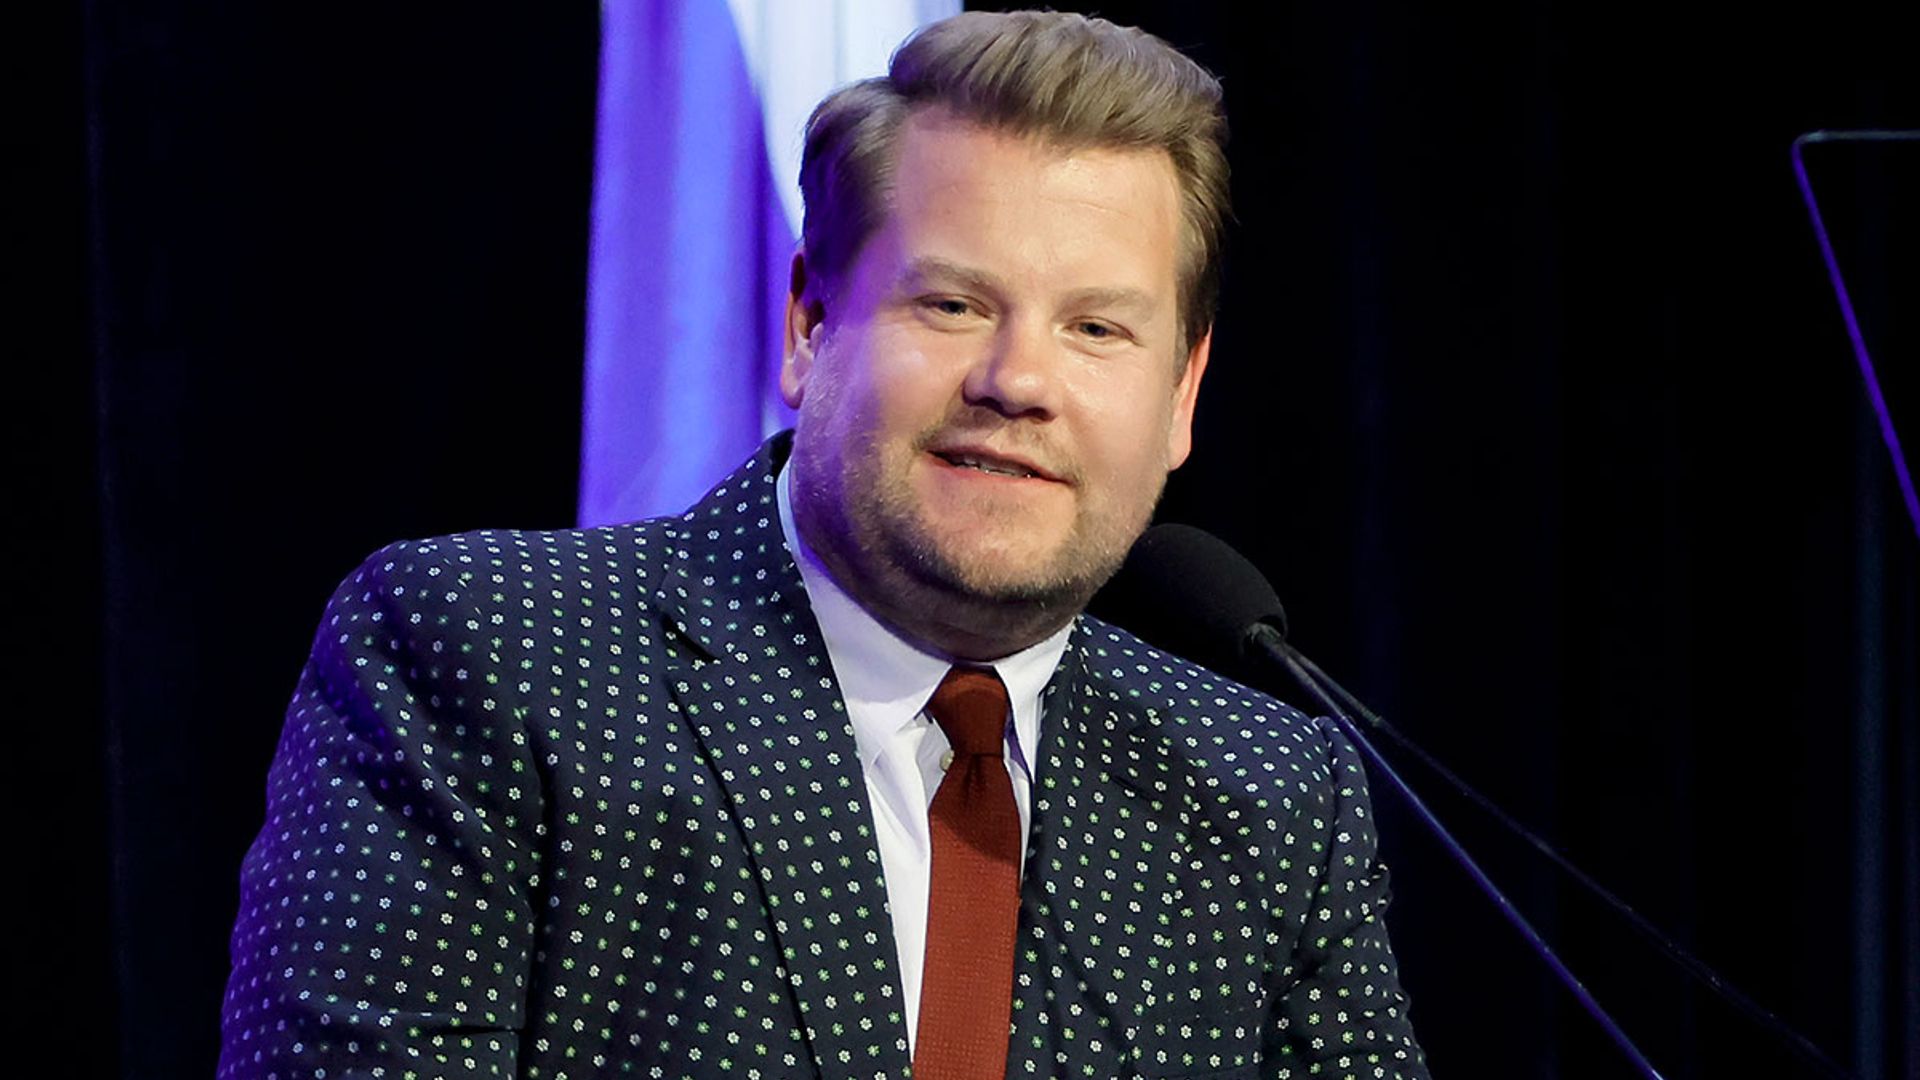 James Corden's real reason for leaving The Late Late Show revealed